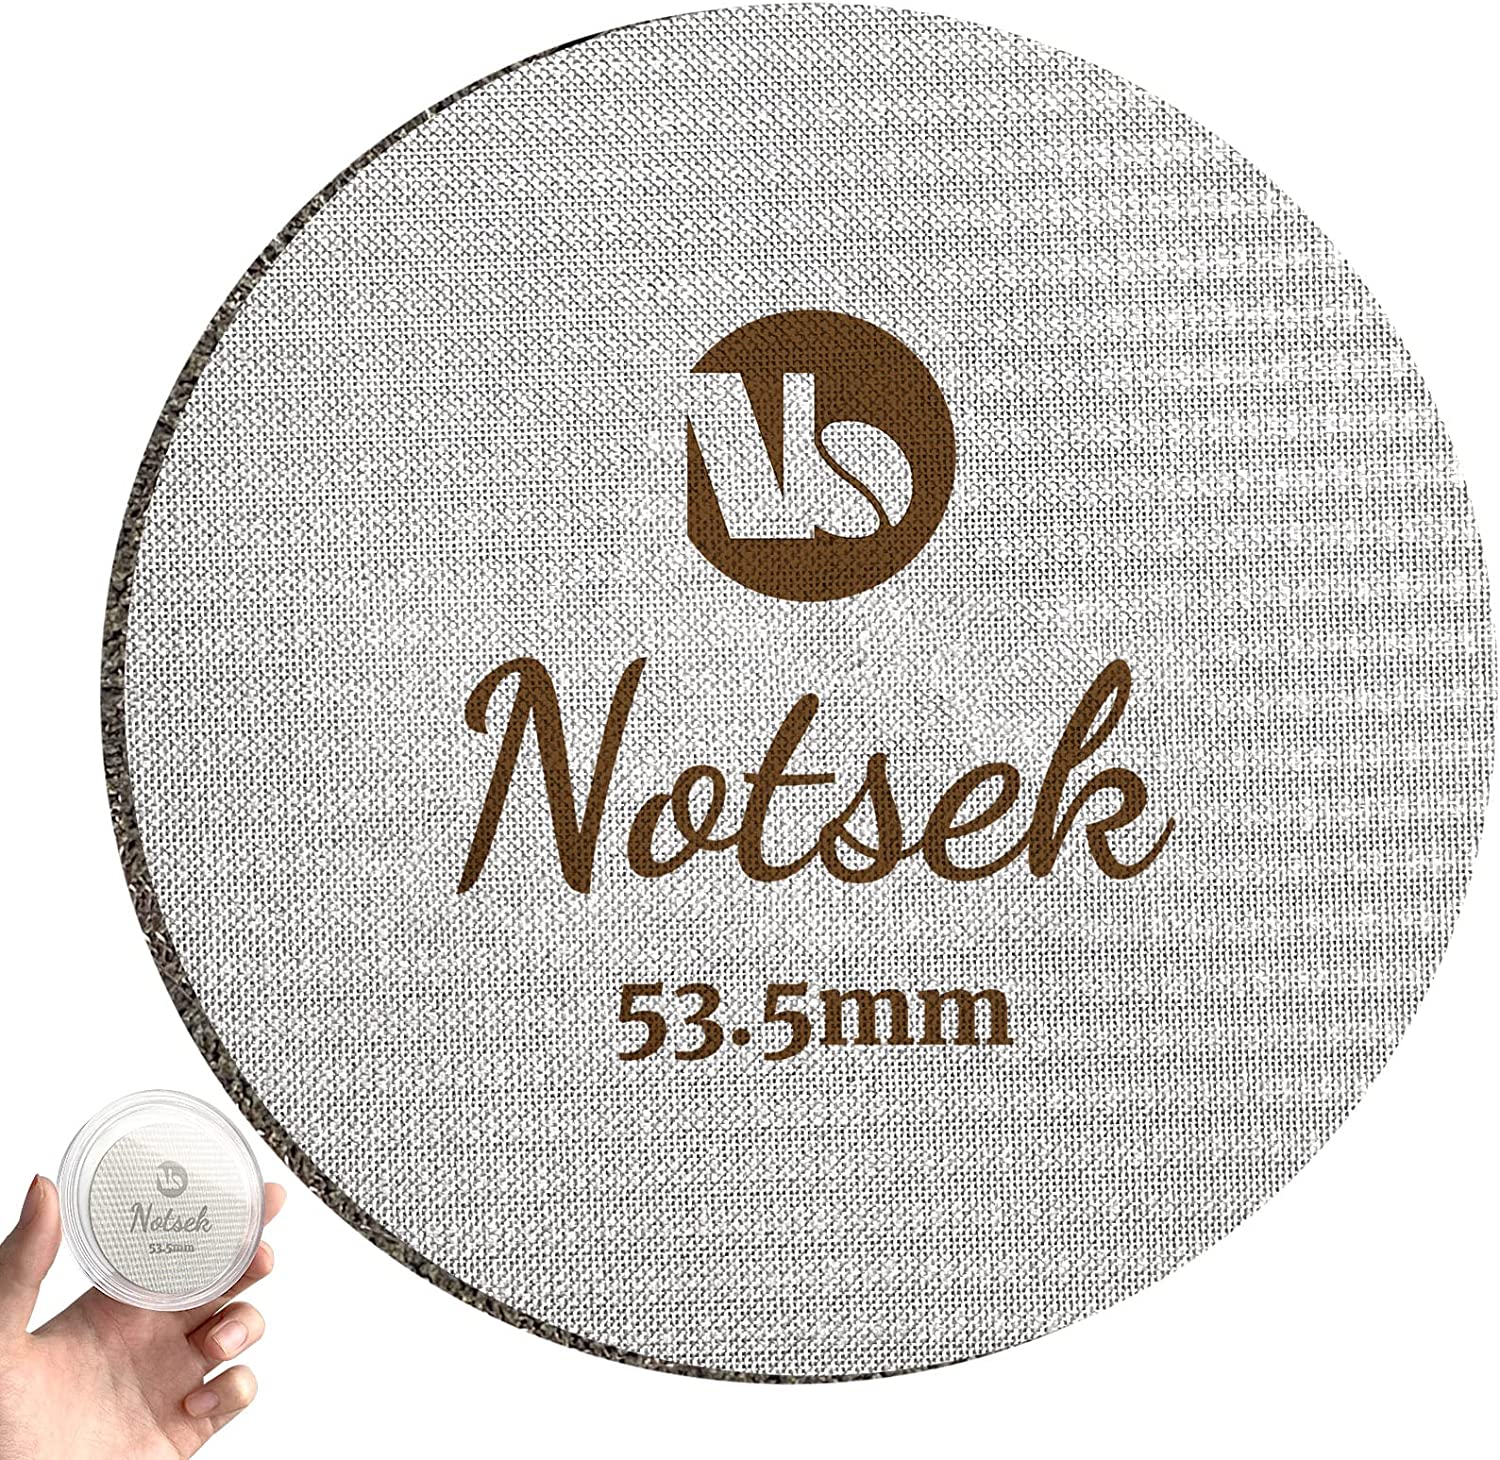 NOTSEK 53.5 mm Coffee Puck Screen with Acrylic Storage Box, Reusable Espresso Puck Screen/Puck Filter/Puck Strainer, 316 Stainless Steel, 1.7 mm Thickness, 150 μm, Coffee Filter Bottom Shower Strainer